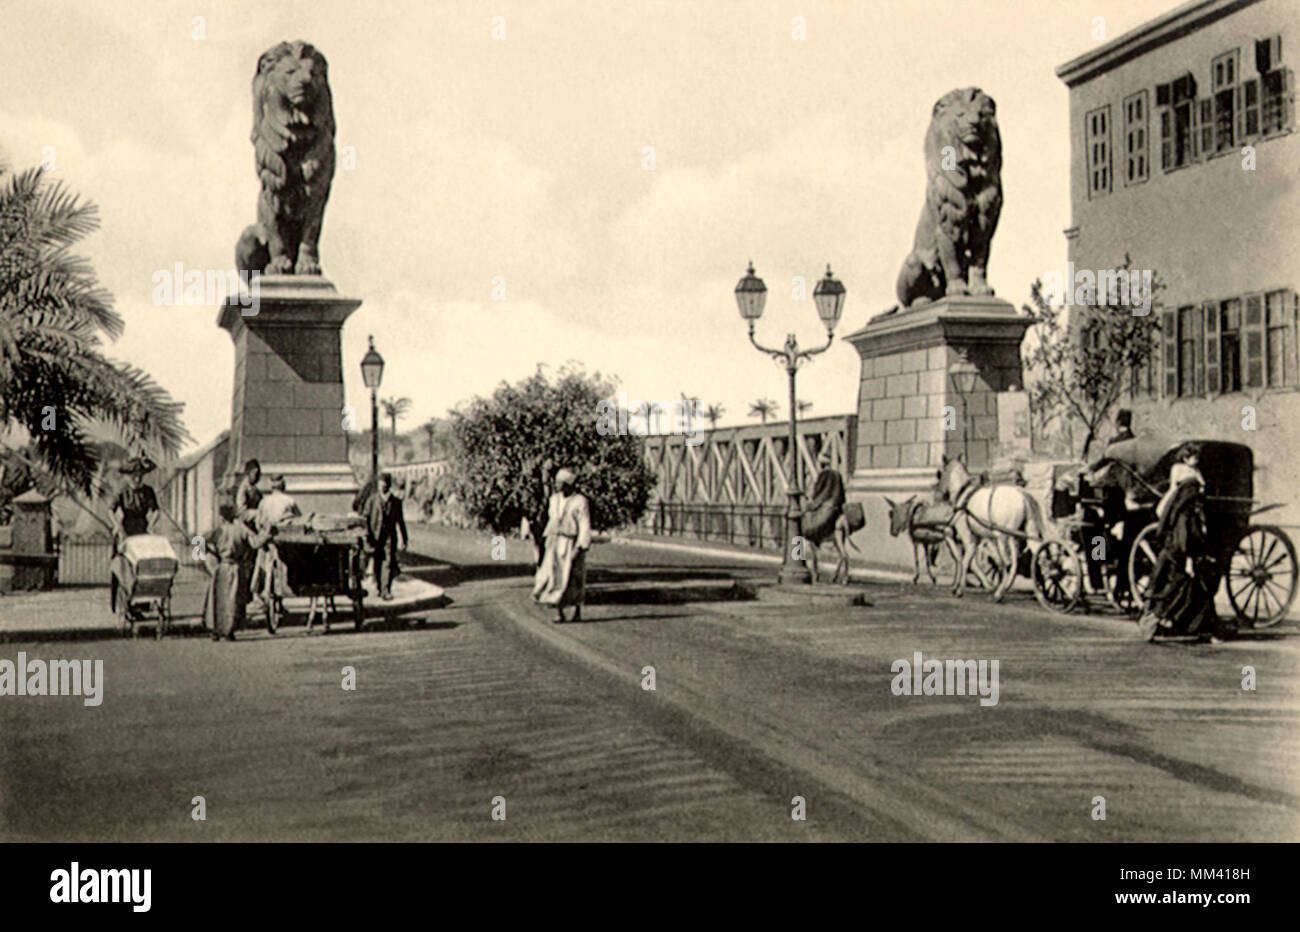 Details about   ANTIQUE STEREOVIEW PHOTO KEYSTONE GREAT NILE BRIDGE FREIGHT BOATS CAIRO EGYPT